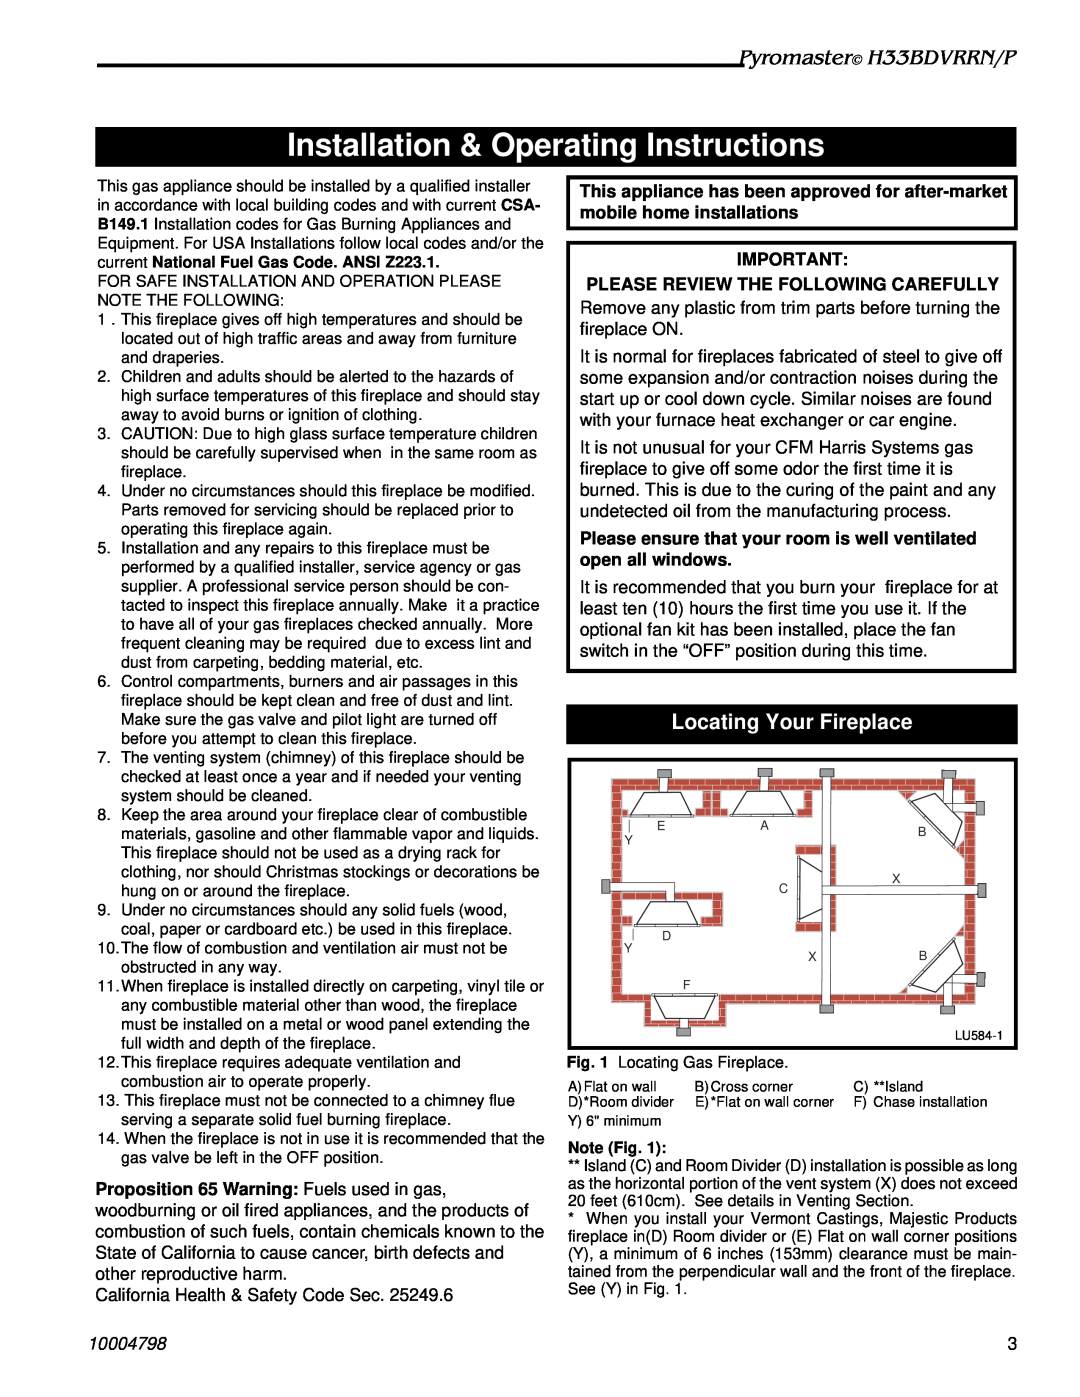 Vermont Casting manual Installation & Operating Instructions, Locating Your Fireplace, Pyromaster H33BDVRRN/P, 10004798 